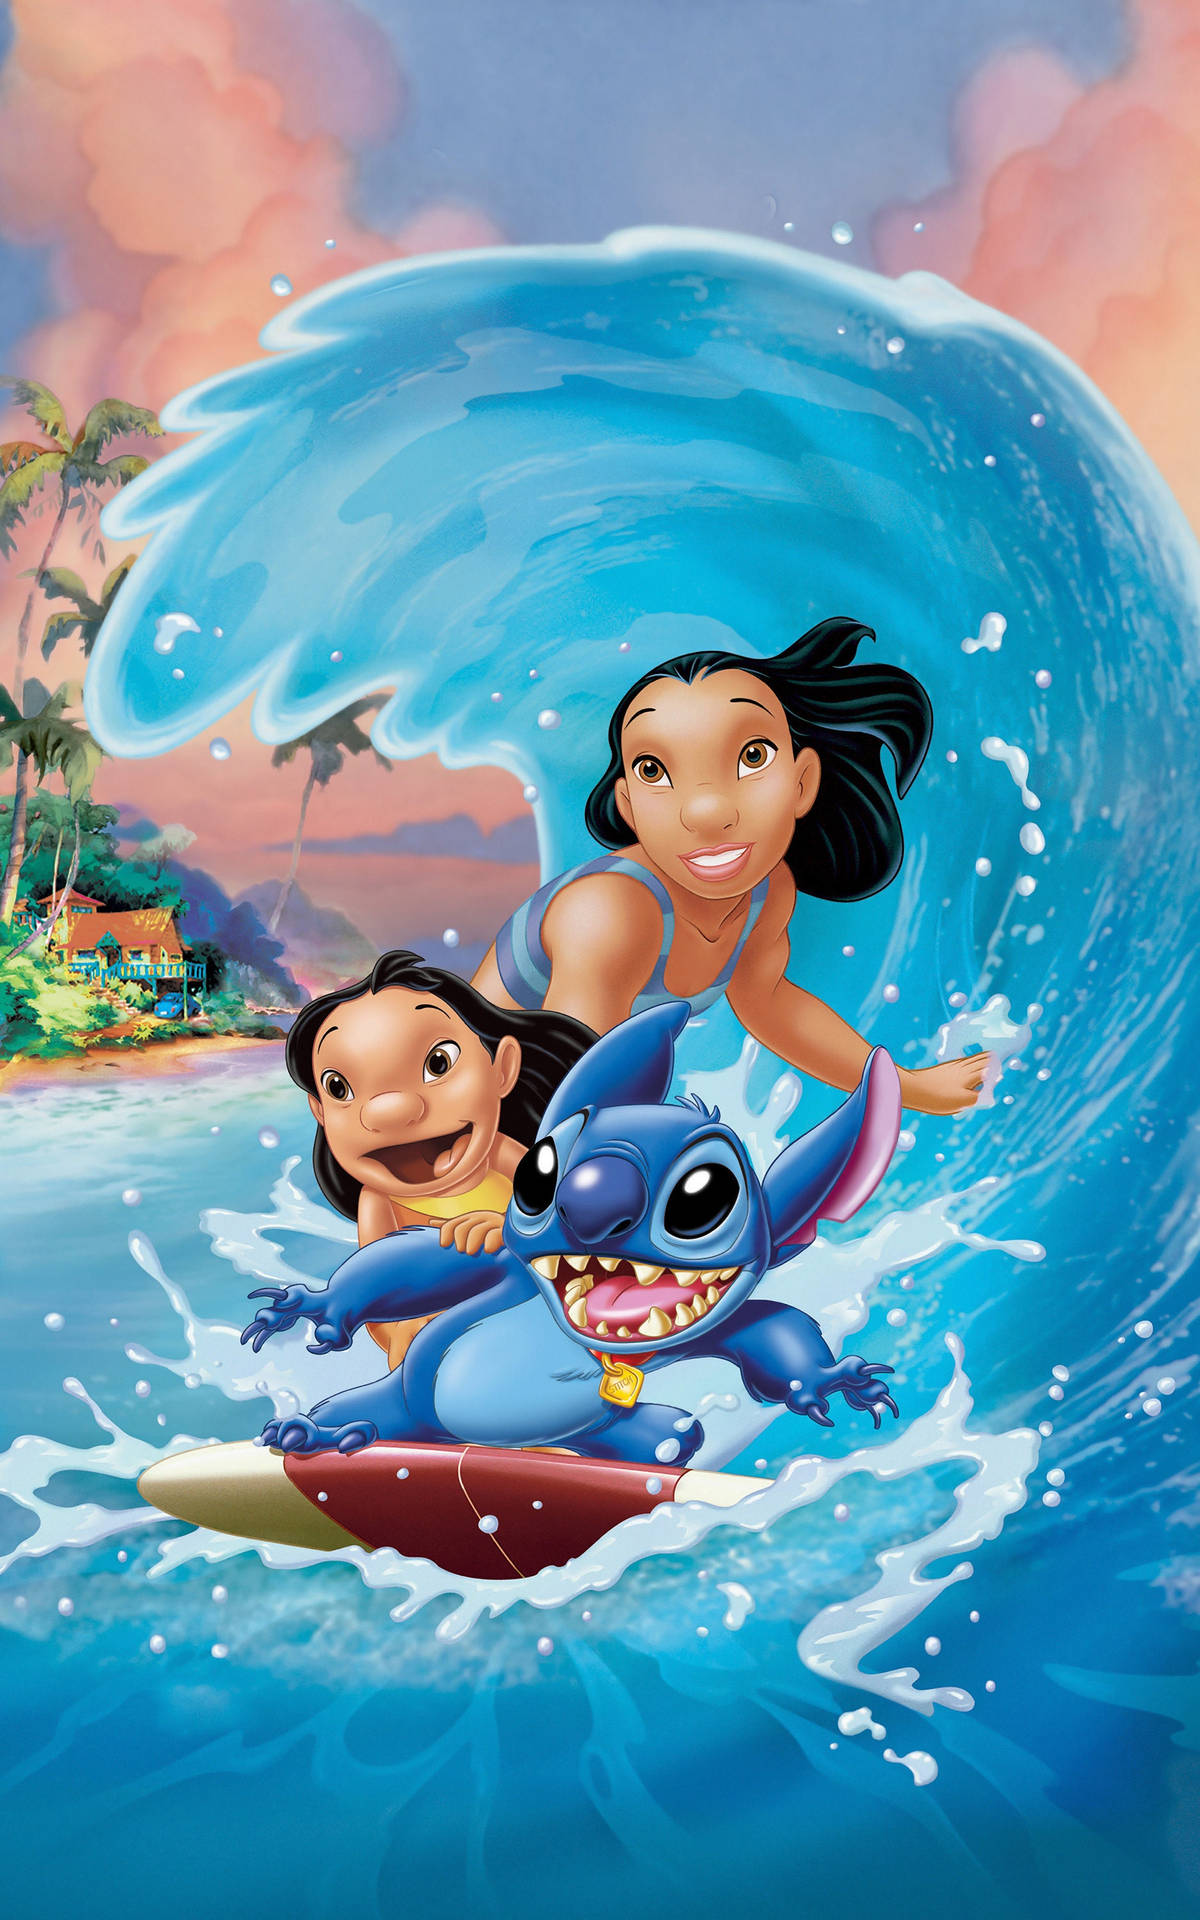 Adorable 3d Render Of Character Stitch From Disney's Lilo And Stitch Background